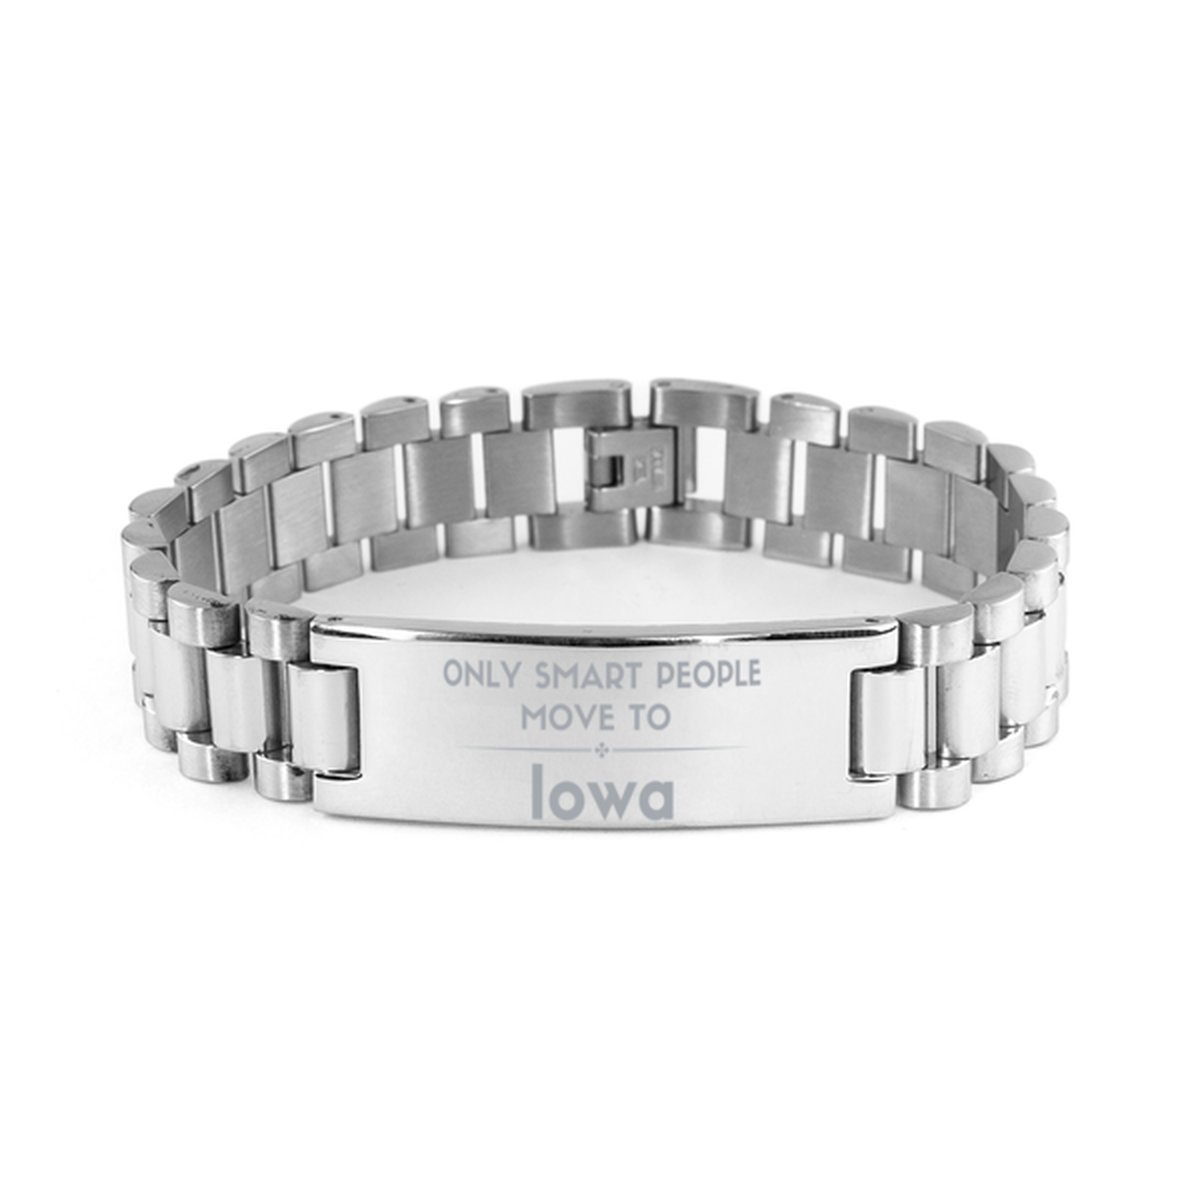 Only smart people move to Iowa Ladder Stainless Steel Bracelet, Gag Gifts For Iowa, Move to Iowa Gifts for Friends Coworker Funny Saying Quote